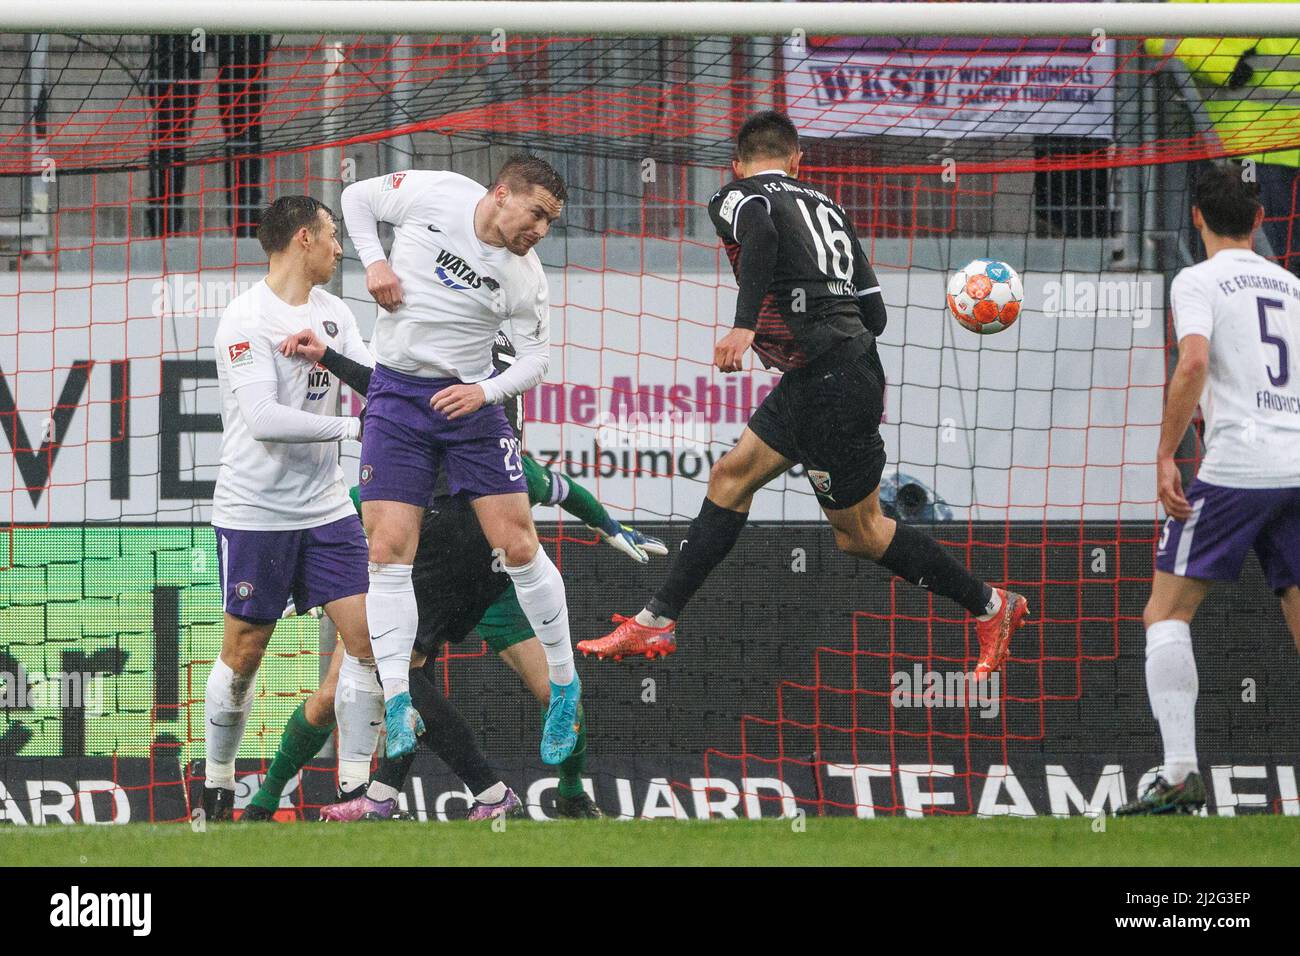 Ingolstadt, Germany. 01st Apr, 2022. Soccer: 2. Bundesliga, FC Ingolstadt 04 - Erzgebirge Aue, Matchday 28, Audi Sportpark. Visar Musliu of Ingolstadt (r) scores to make it 2:0. Anthony Barylla of Erzgebirge Aue cannot keep the ball out on the left. Credit: Matthias Balk/dpa - IMPORTANT NOTE: In accordance with the requirements of the DFL Deutsche Fußball Liga and the DFB Deutscher Fußball-Bund, it is prohibited to use or have used photographs taken in the stadium and/or of the match in the form of sequence pictures and/or video-like photo series./dpa/Alamy Live News Stock Photo